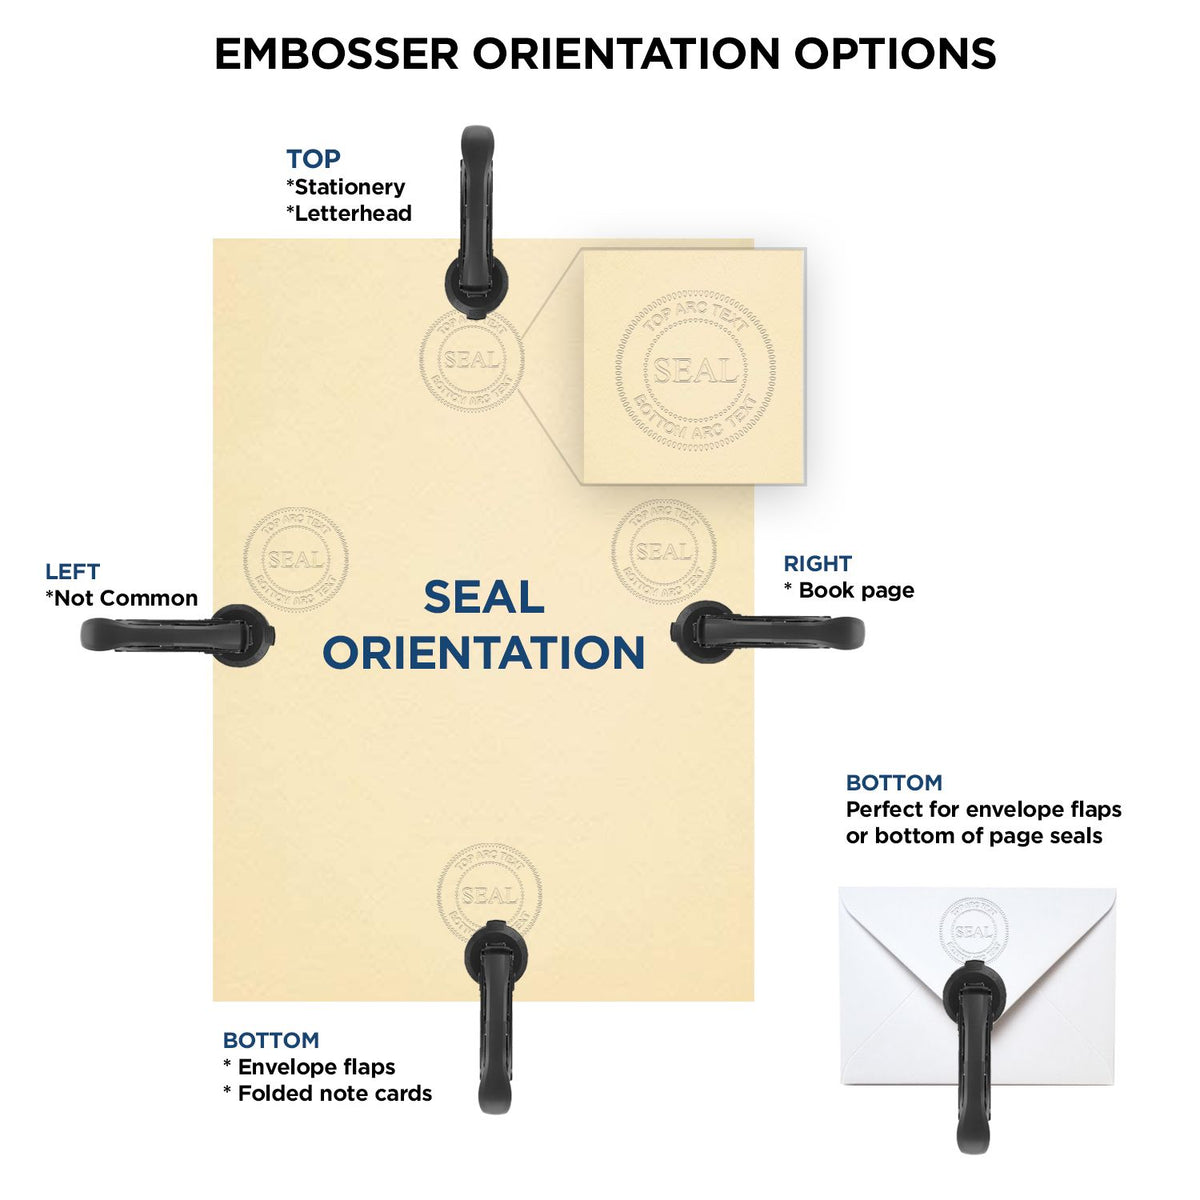 An infographic for the Extended Long Reach Kentucky Surveyor Embosser showing embosser orientation, this is showing examples of a top, bottom, right and left insert.